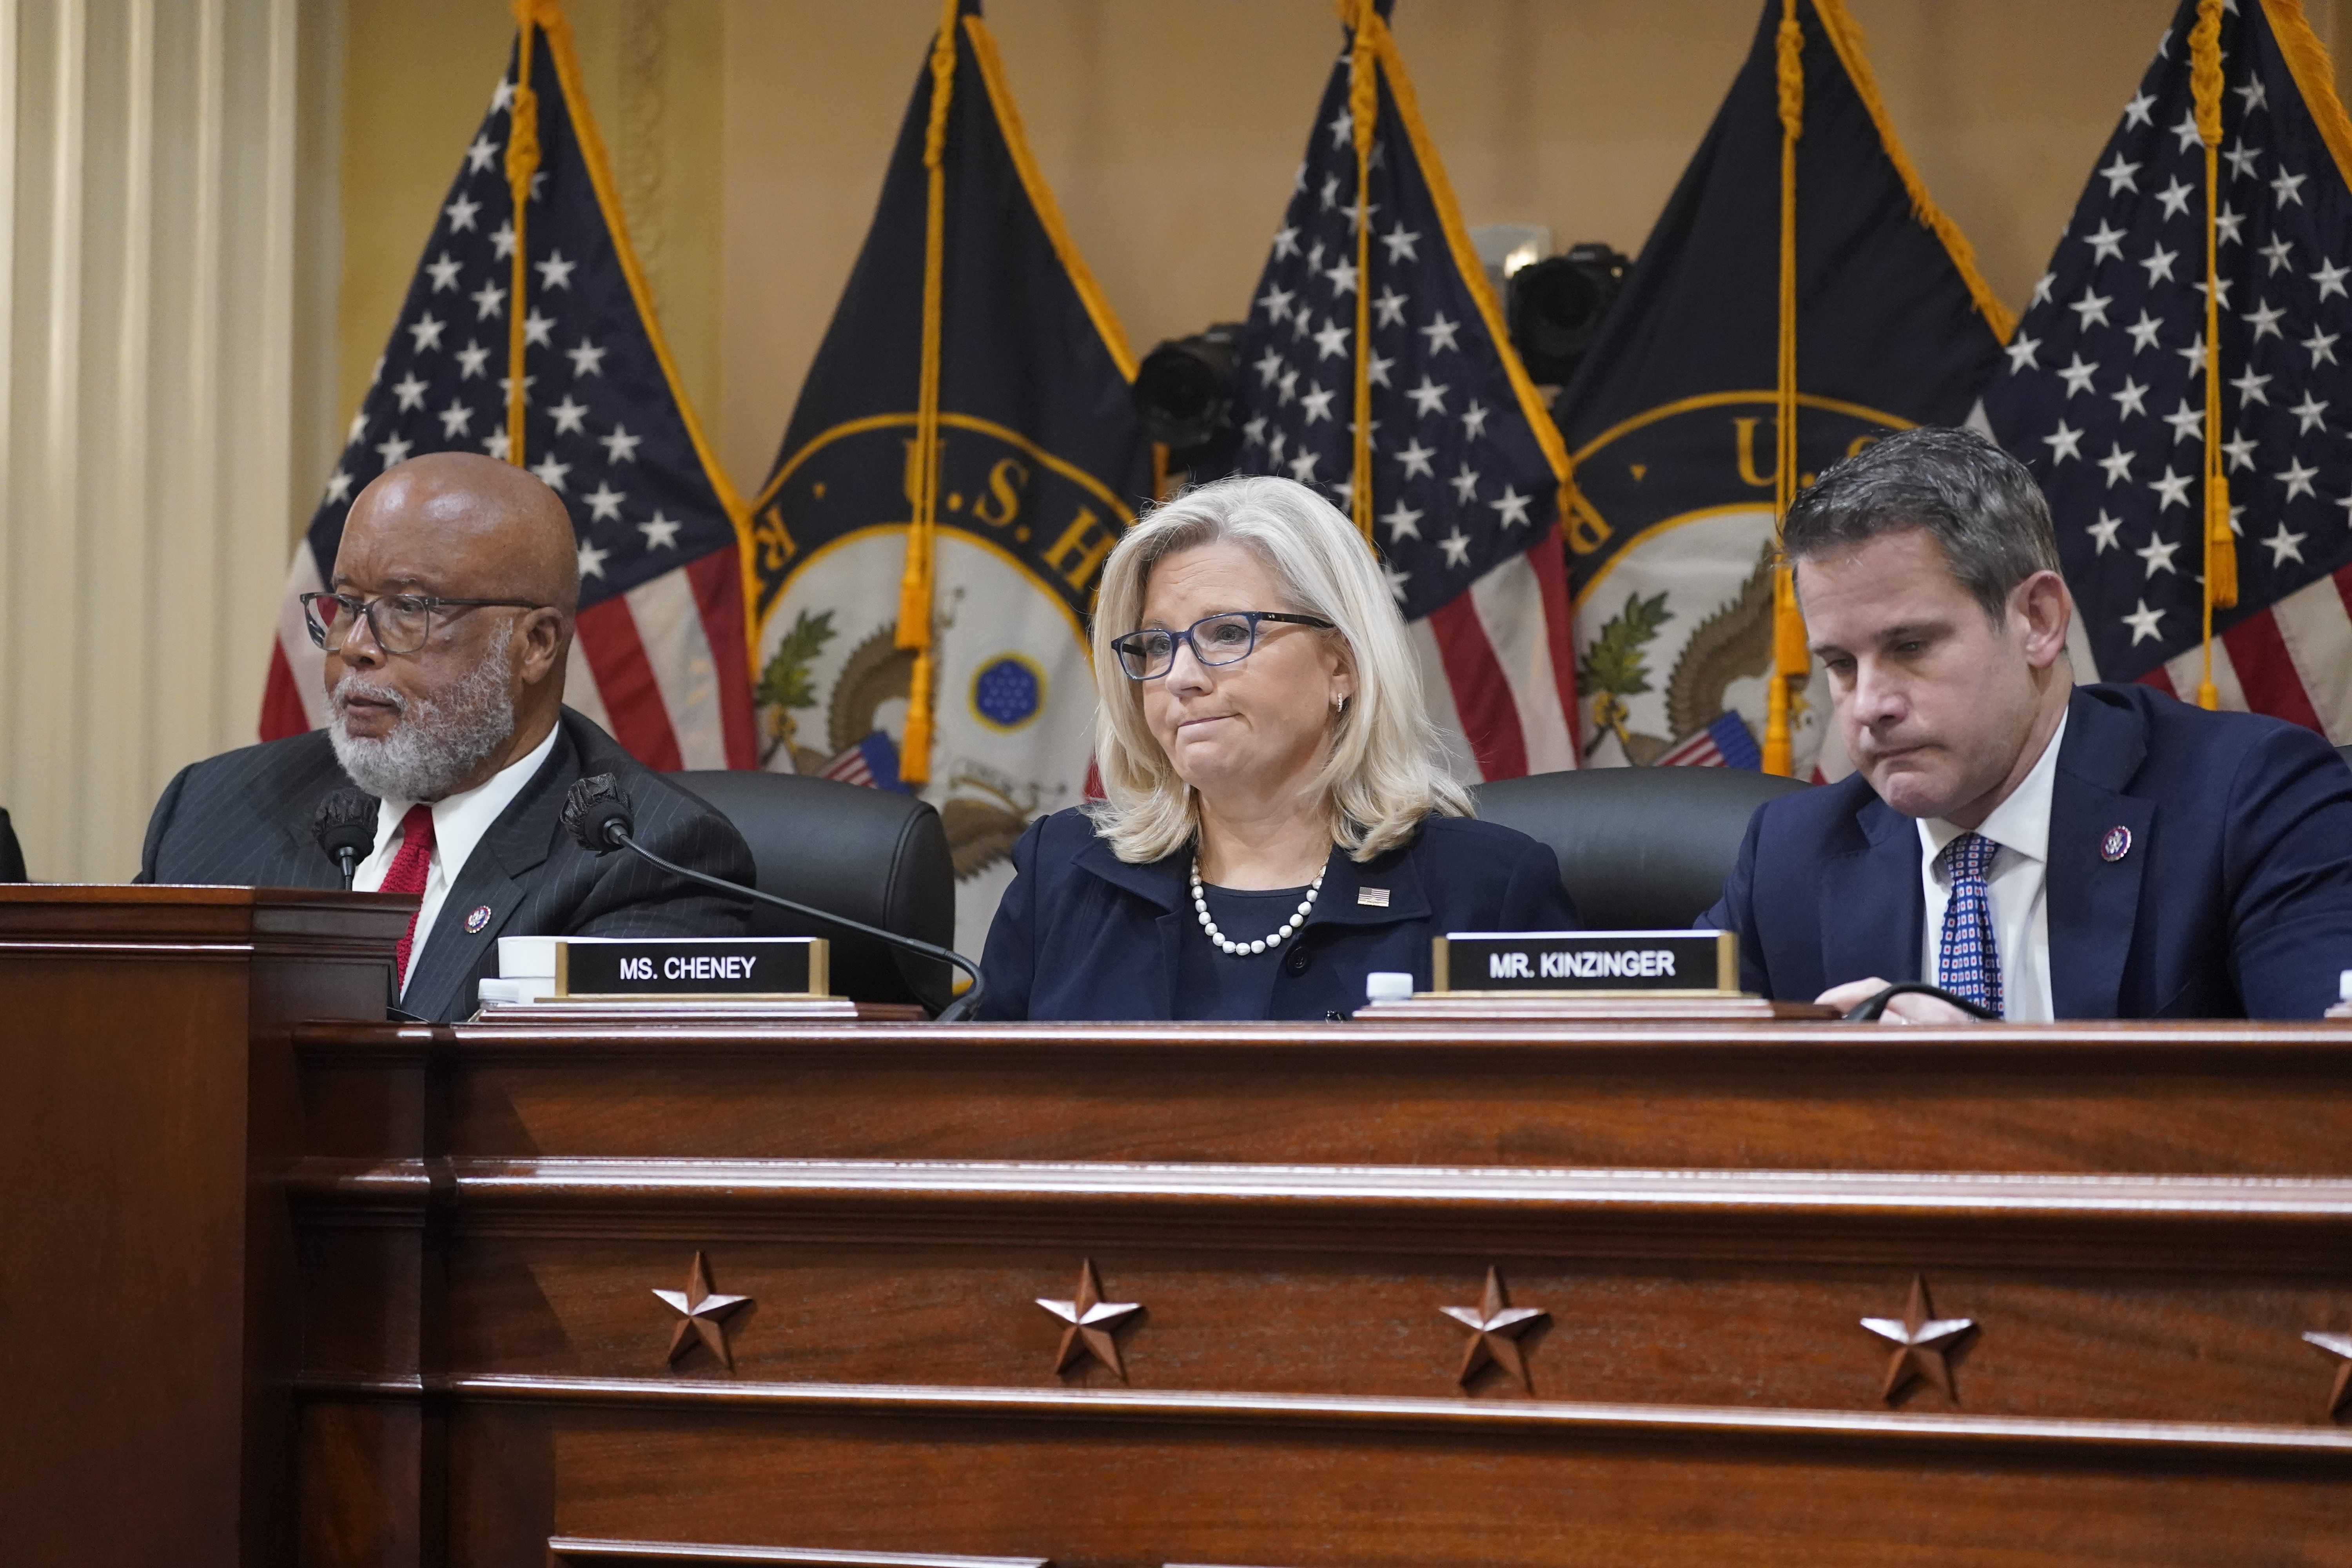 From left, Chairman Bennie Thompson, D-Miss., Vice Chair Liz Cheney, R-Wyo., and Rep. Adam Kinzinger, R-Ill., listen as the House select committee investigating the Jan. 6, 2021 attack on the Capitol holds a hearing at the Capitol in Washington, Thursday, June 16, 2022. (AP Photo/J. Scott Applewhite)